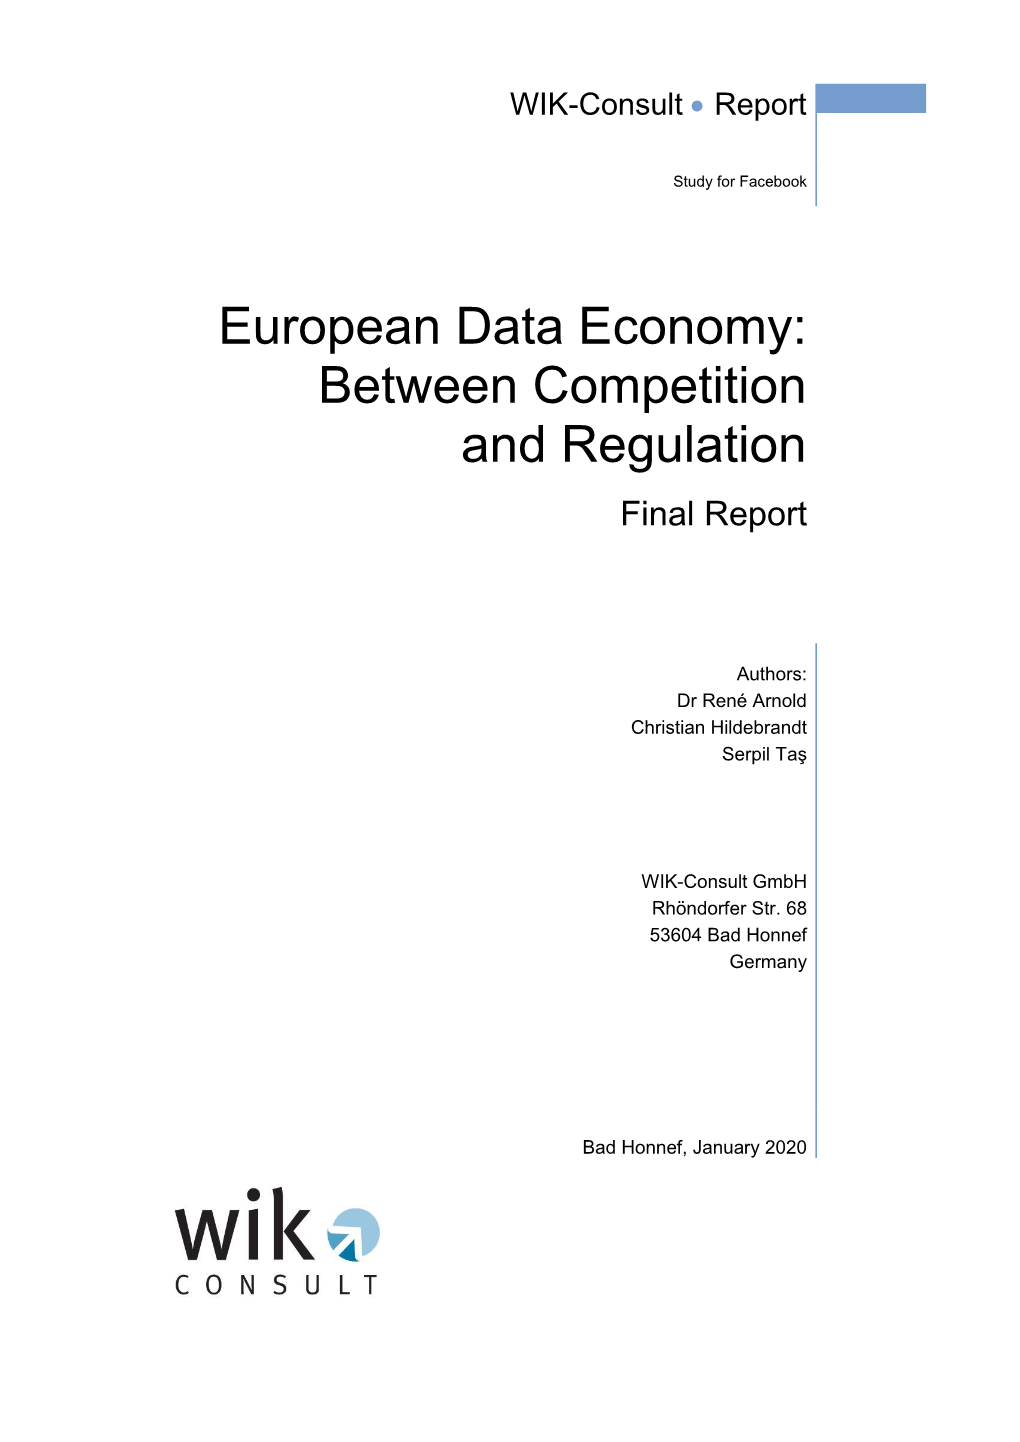 European Data Economy: Between Competition and Regulation Final Report